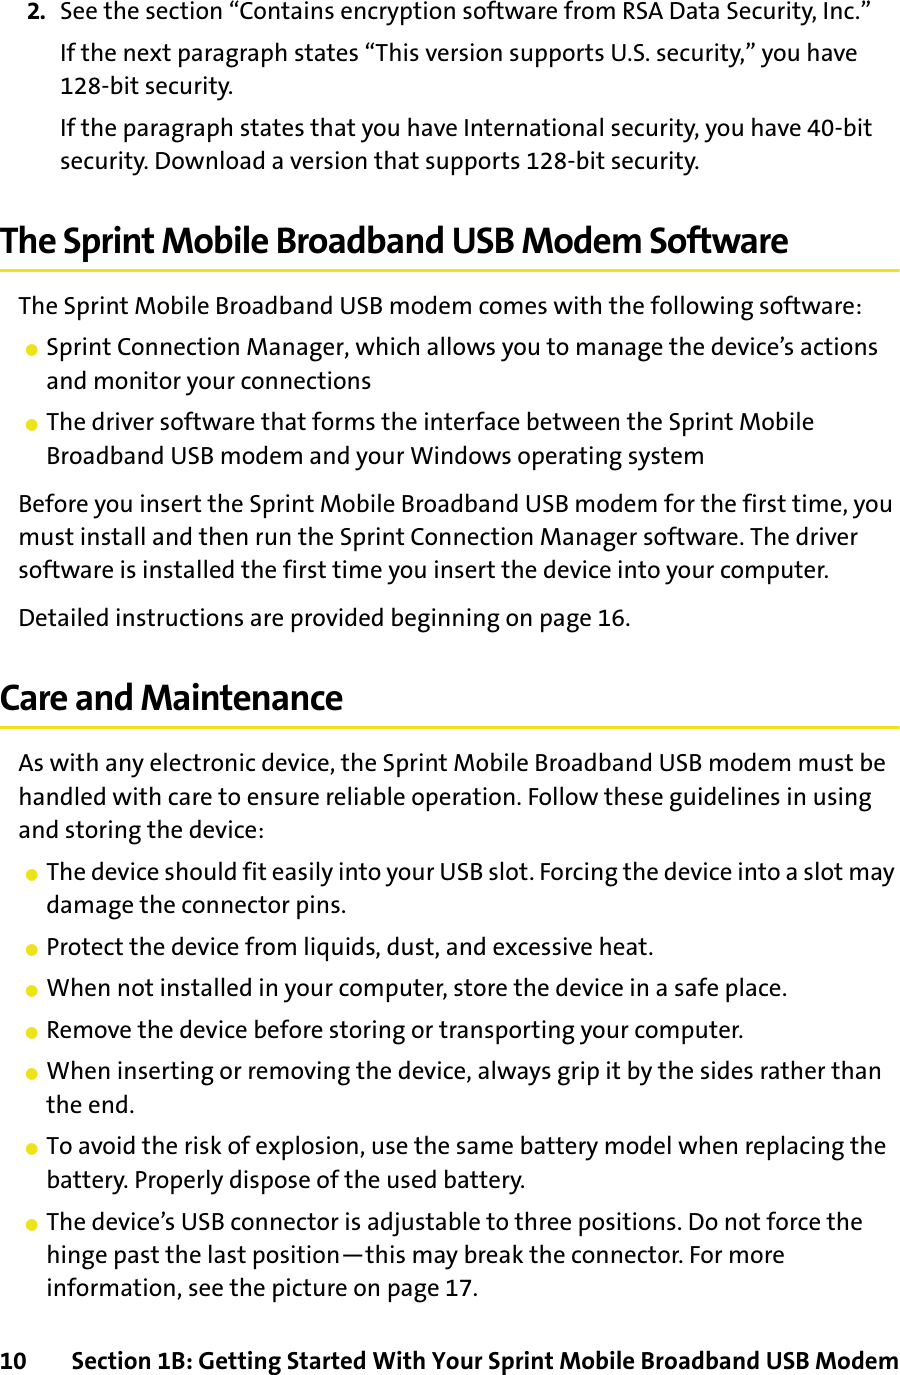 10 Section 1B: Getting Started With Your Sprint Mobile Broadband USB Modem2. See the section “Contains encryption software from RSA Data Security, Inc.” If the next paragraph states “This version supports U.S. security,” you have 128-bit security.If the paragraph states that you have International security, you have 40-bit security. Download a version that supports 128-bit security.The Sprint Mobile Broadband USB Modem SoftwareThe Sprint Mobile Broadband USB modem comes with the following software:䢇Sprint Connection Manager, which allows you to manage the device’s actions and monitor your connections䢇The driver software that forms the interface between the Sprint Mobile Broadband USB modem and your Windows operating systemBefore you insert the Sprint Mobile Broadband USB modem for the first time, you must install and then run the Sprint Connection Manager software. The driver software is installed the first time you insert the device into your computer.Detailed instructions are provided beginning on page 16.Care and MaintenanceAs with any electronic device, the Sprint Mobile Broadband USB modem must be handled with care to ensure reliable operation. Follow these guidelines in using and storing the device:䢇The device should fit easily into your USB slot. Forcing the device into a slot may damage the connector pins.䢇Protect the device from liquids, dust, and excessive heat.䢇When not installed in your computer, store the device in a safe place.䢇Remove the device before storing or transporting your computer.䢇When inserting or removing the device, always grip it by the sides rather than the end.䢇To avoid the risk of explosion, use the same battery model when replacing the battery. Properly dispose of the used battery.䢇The device’s USB connector is adjustable to three positions. Do not force the hinge past the last position—this may break the connector. For more information, see the picture on page 17.